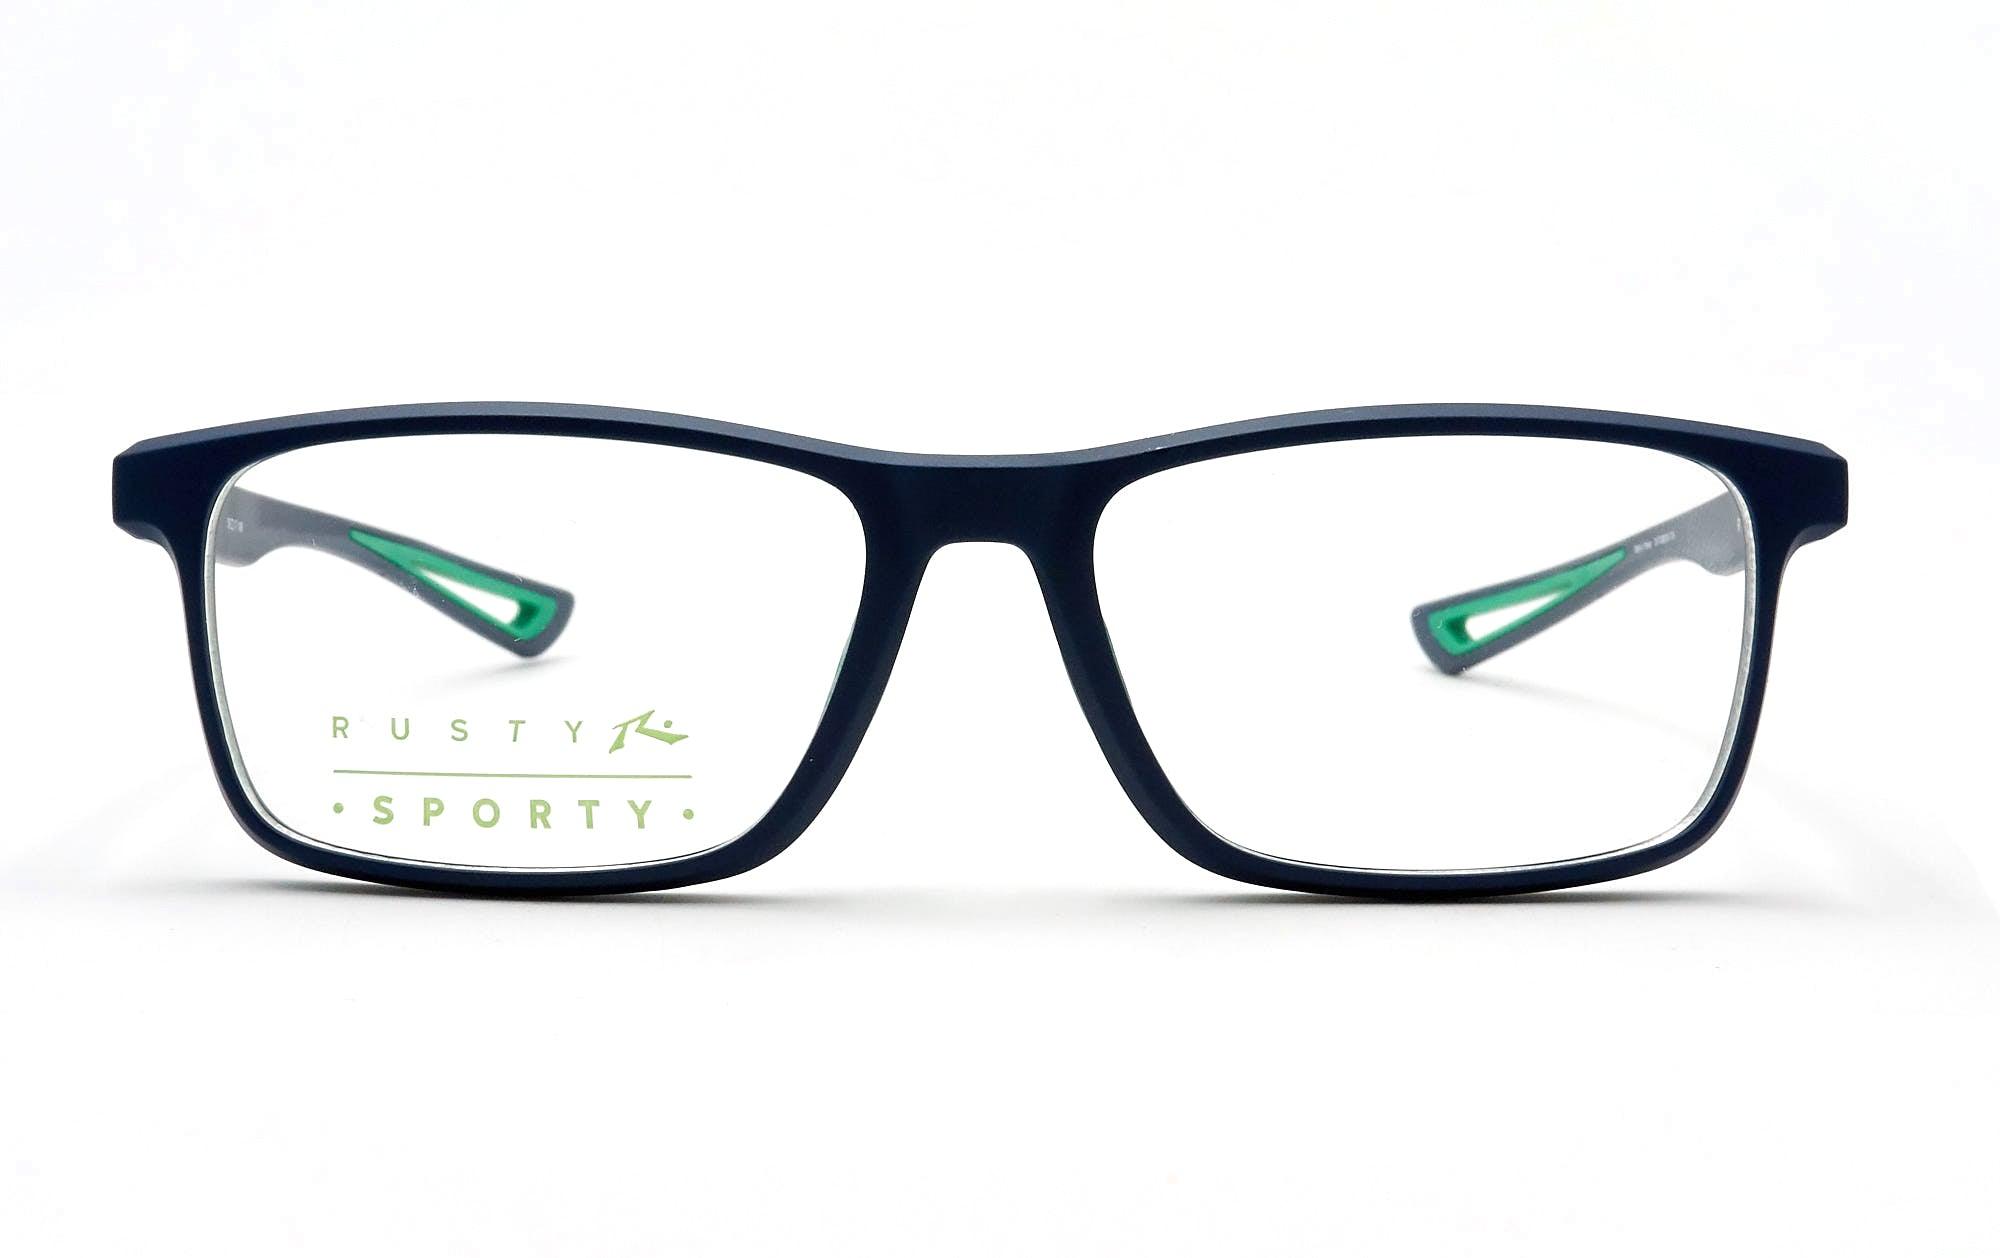 RUSTY PRO15 MBLUE GREEN - Opticas Lookout